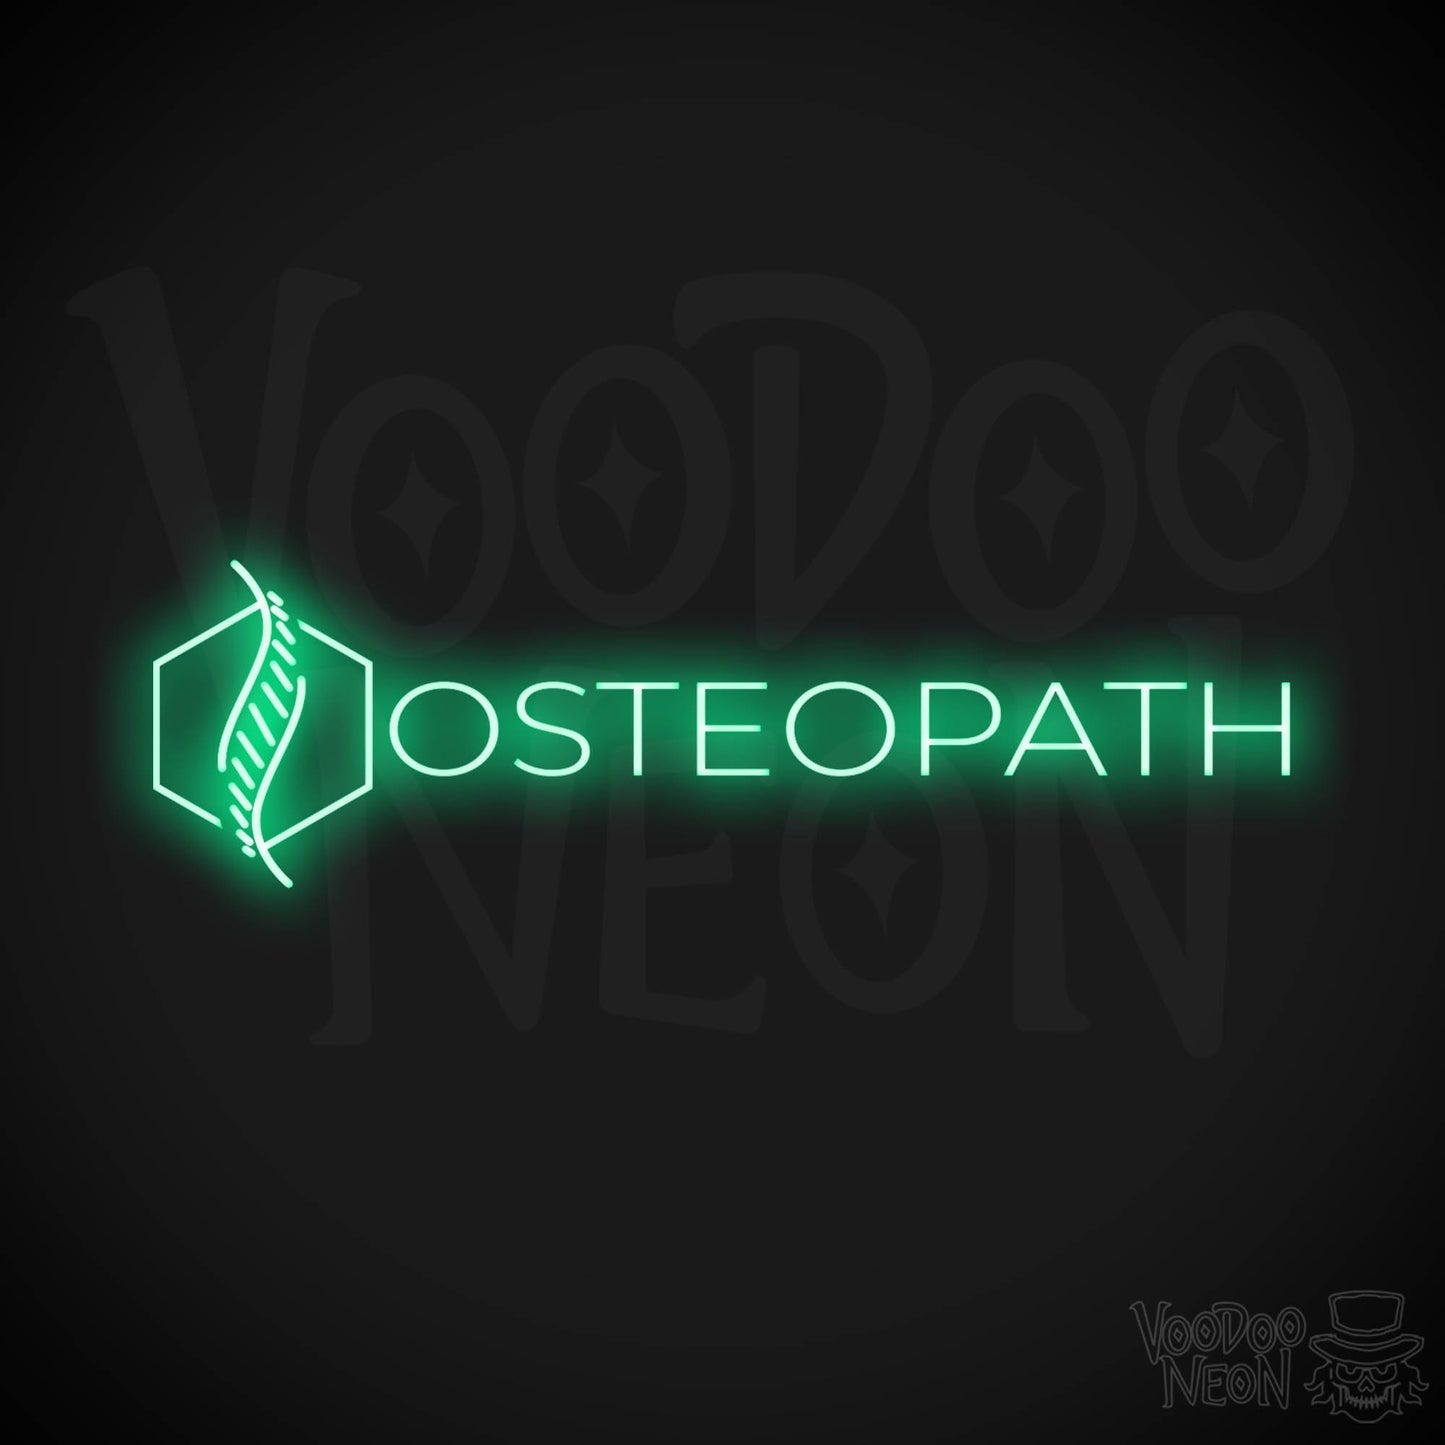 Osteopath LED Neon - Green